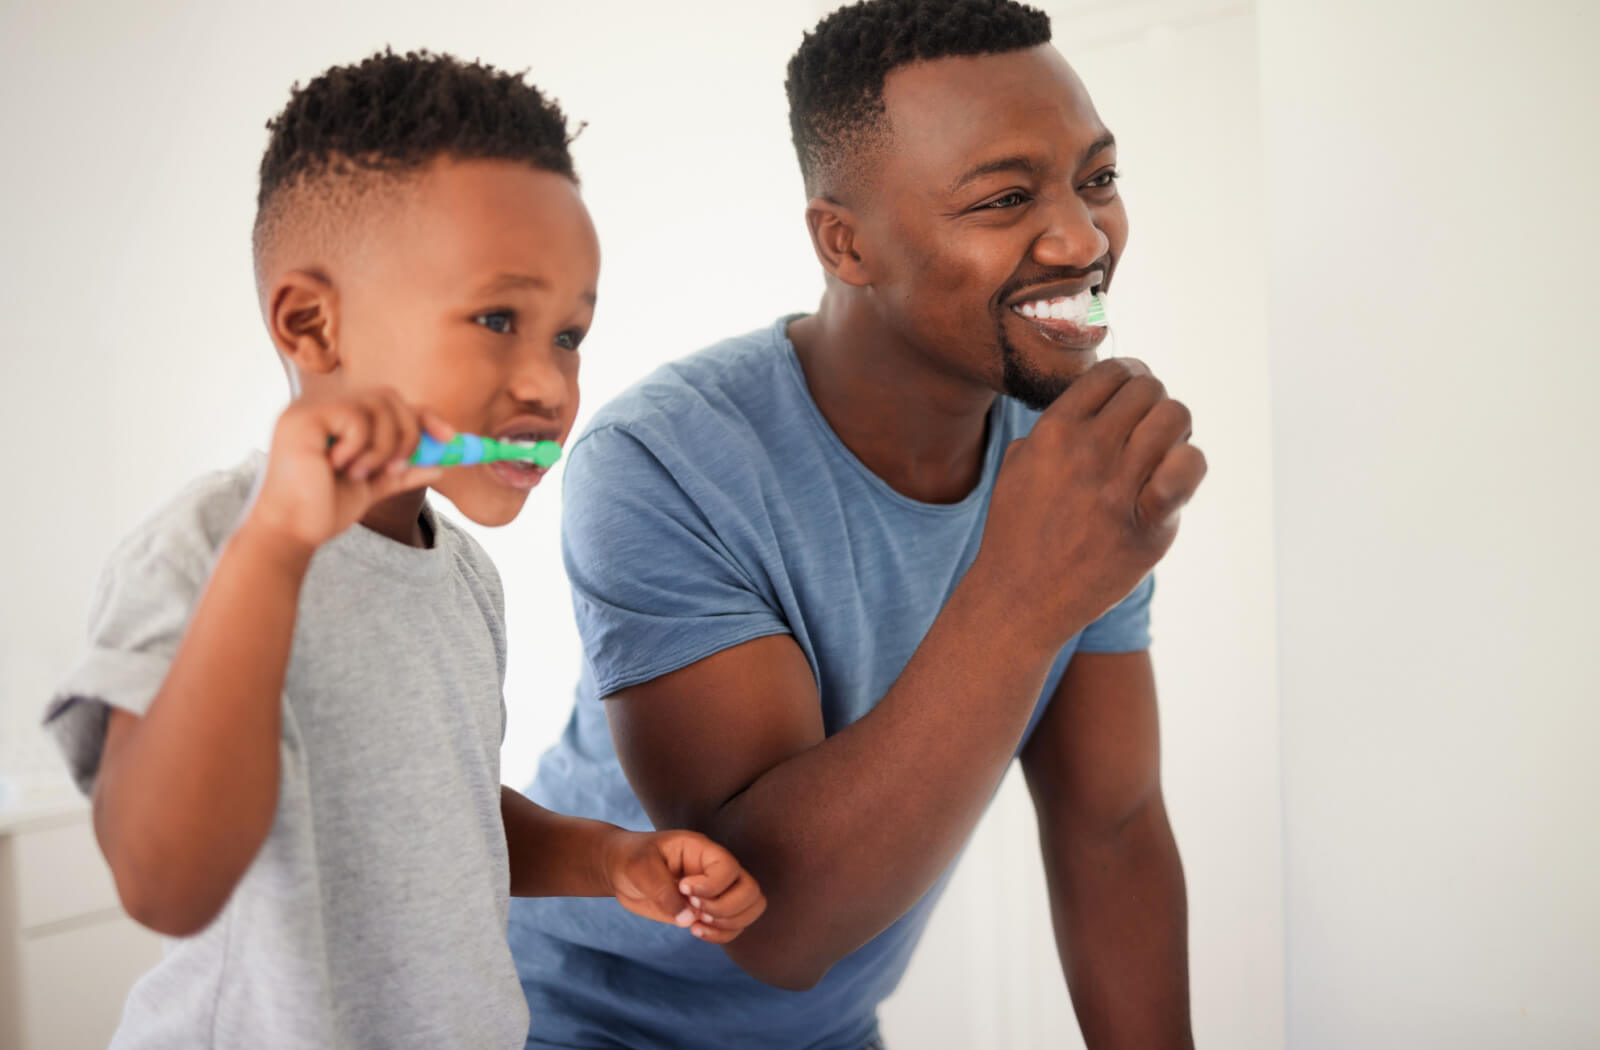 A father teaching his young boy to brush his teeth in the bathroom.